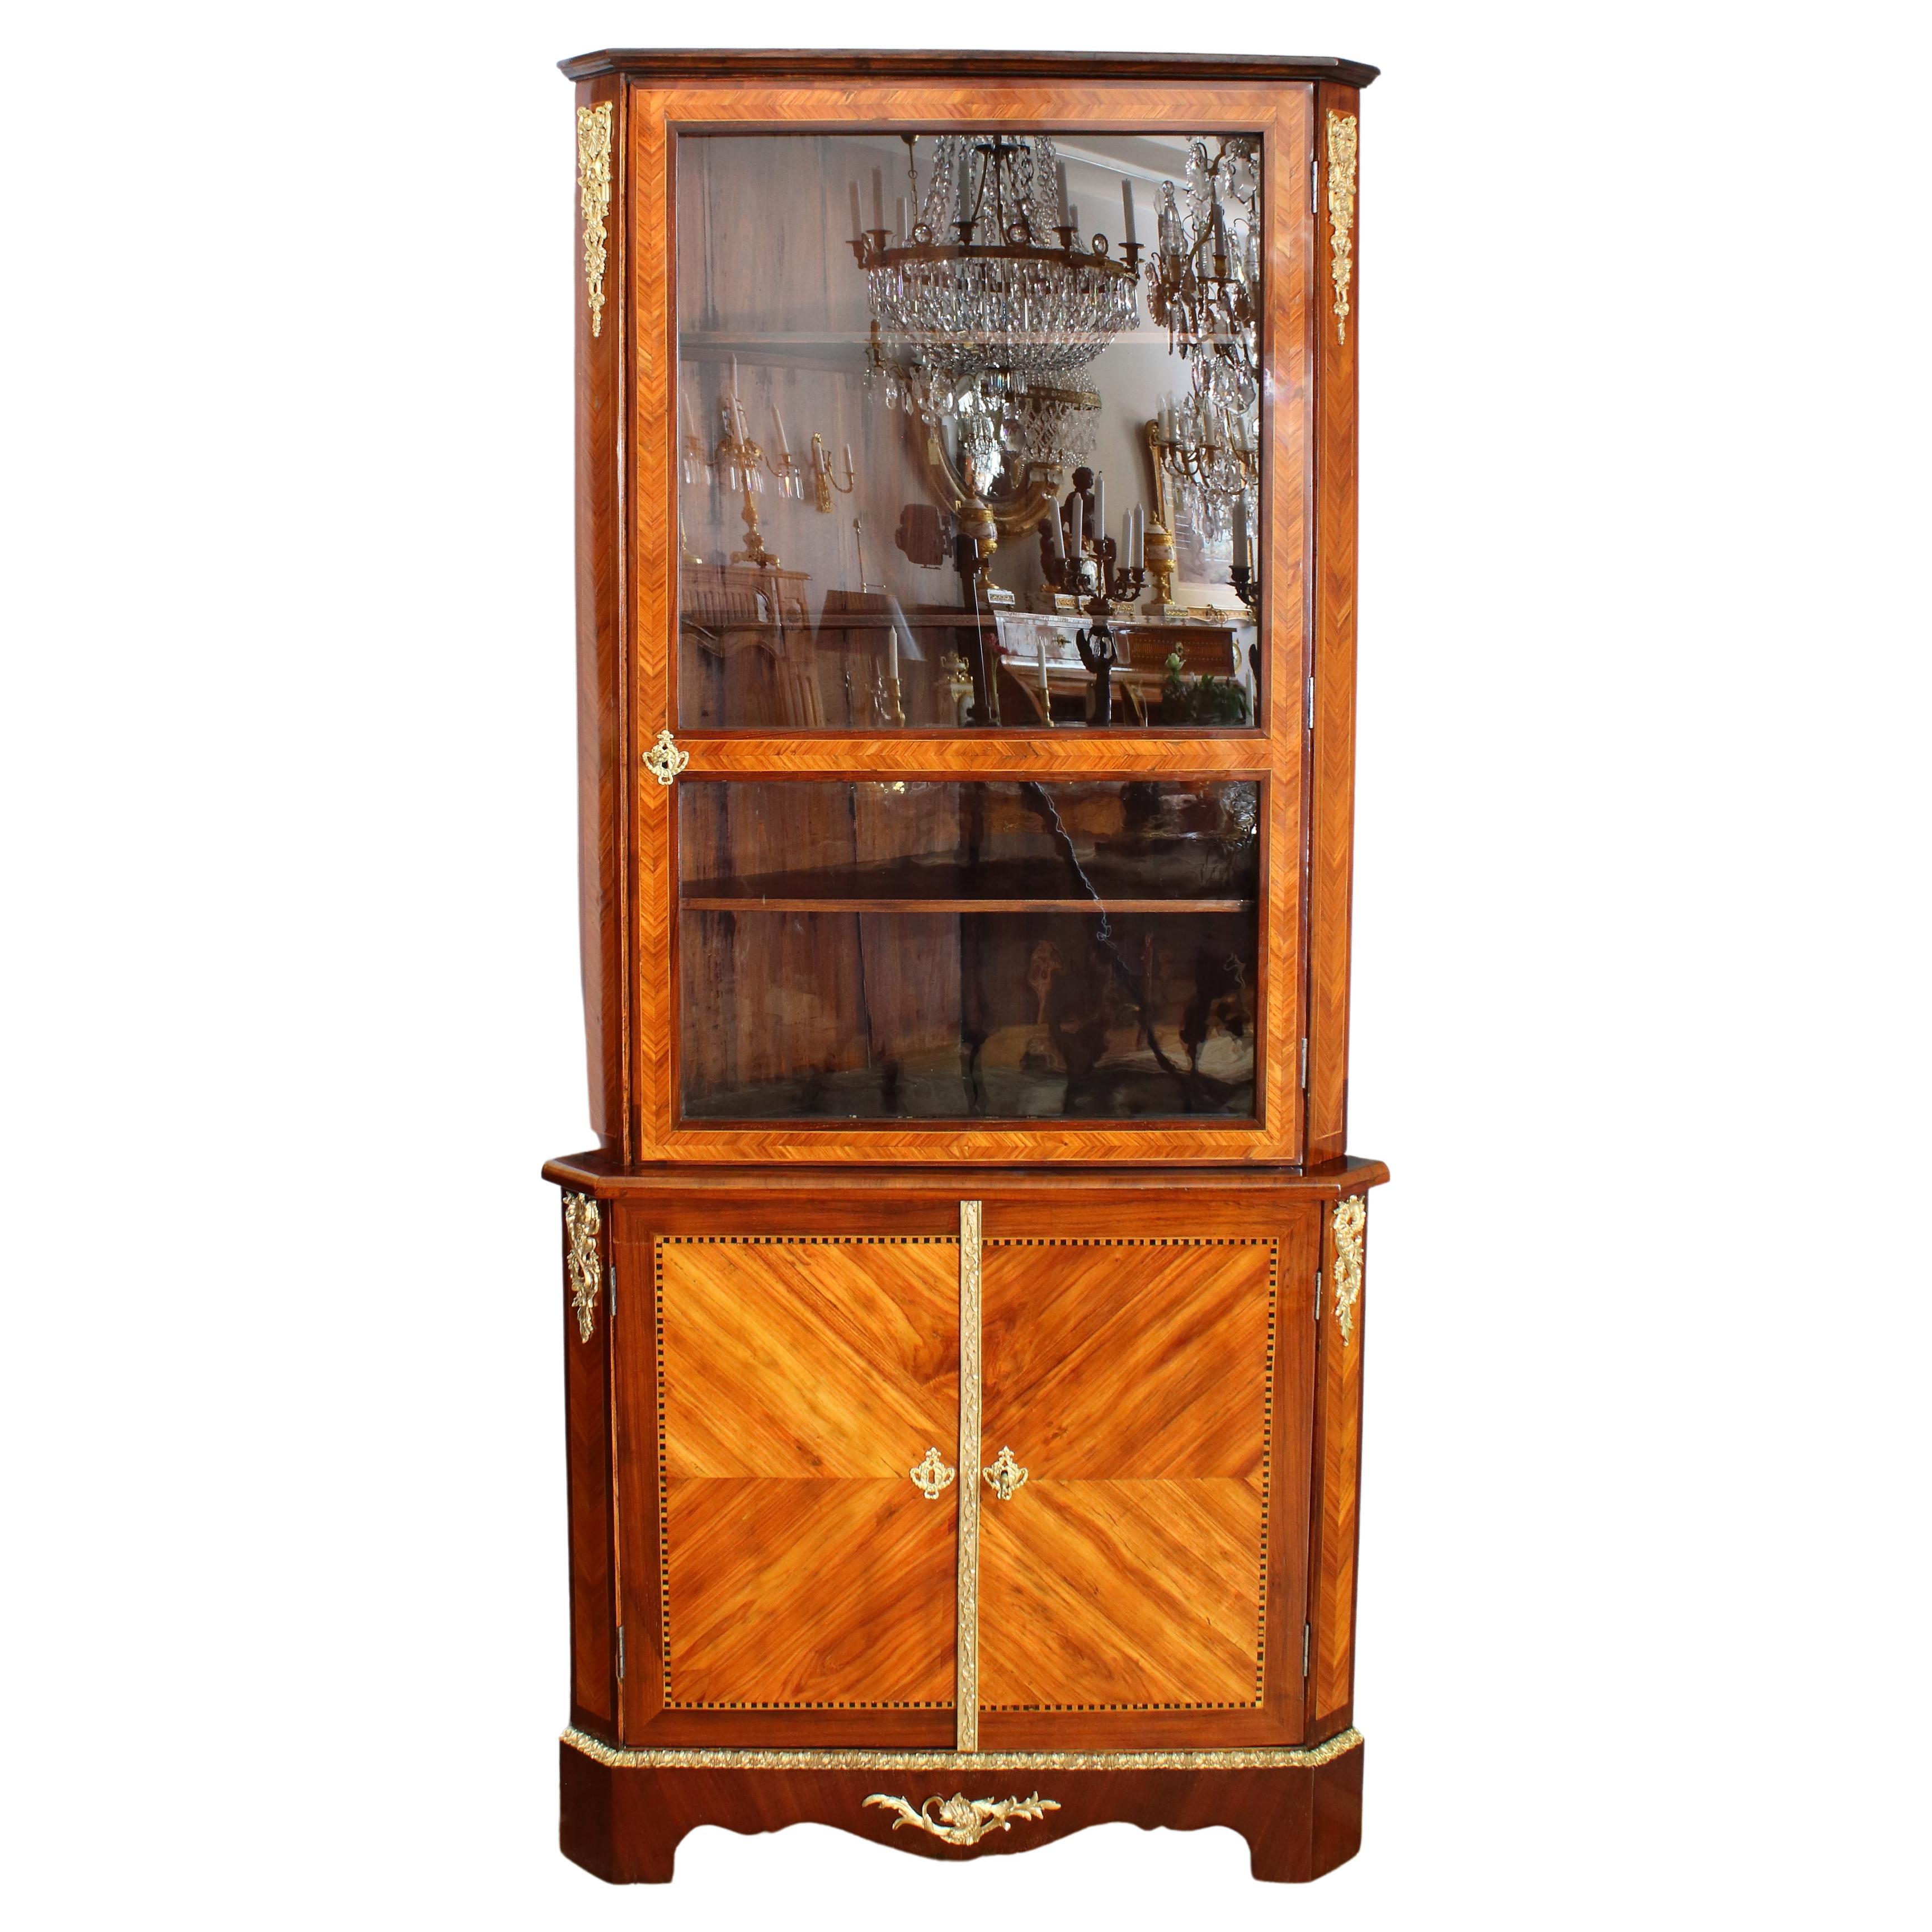 Early 18th Century French Régence Marquetry two-piece corner cabinet/ encoignure : 

lower cabinet section of triangular shape with canted corners on a base featuring a curved front with central ornamental apron and bracket feet. Two doors with